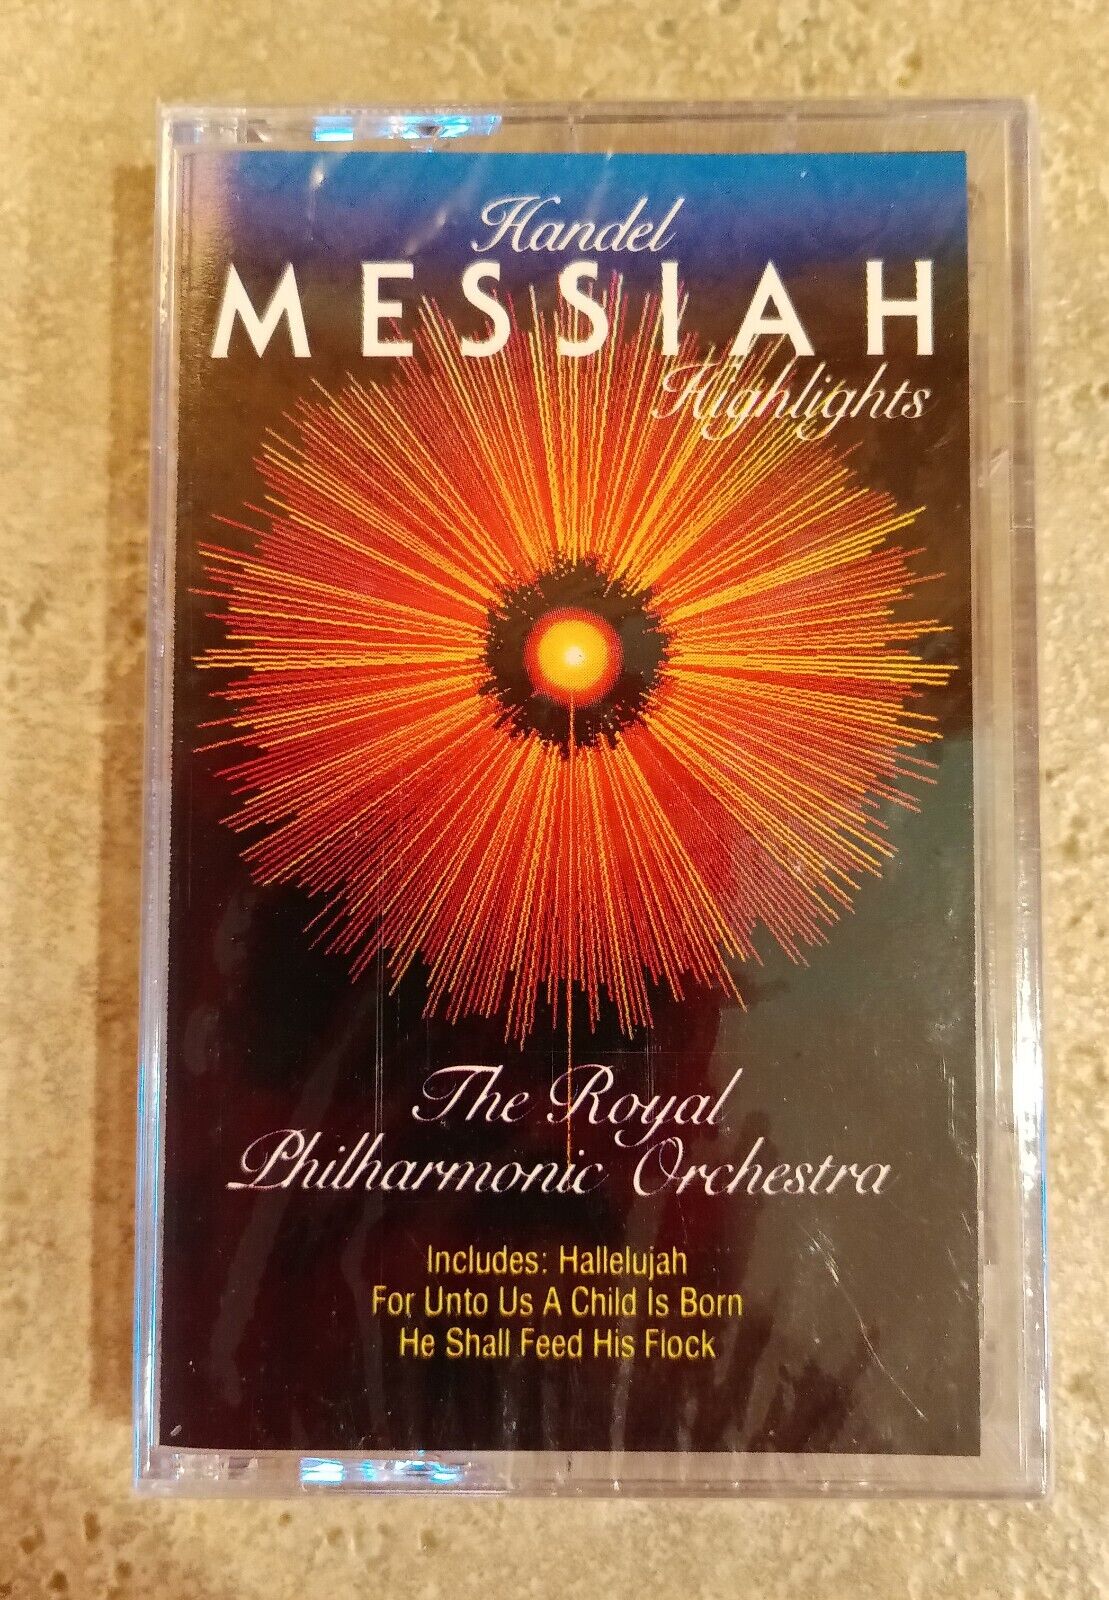 VTG Handel Messiah Highlights by The Royal Philharmonic Orchestra. 1992 Sealed